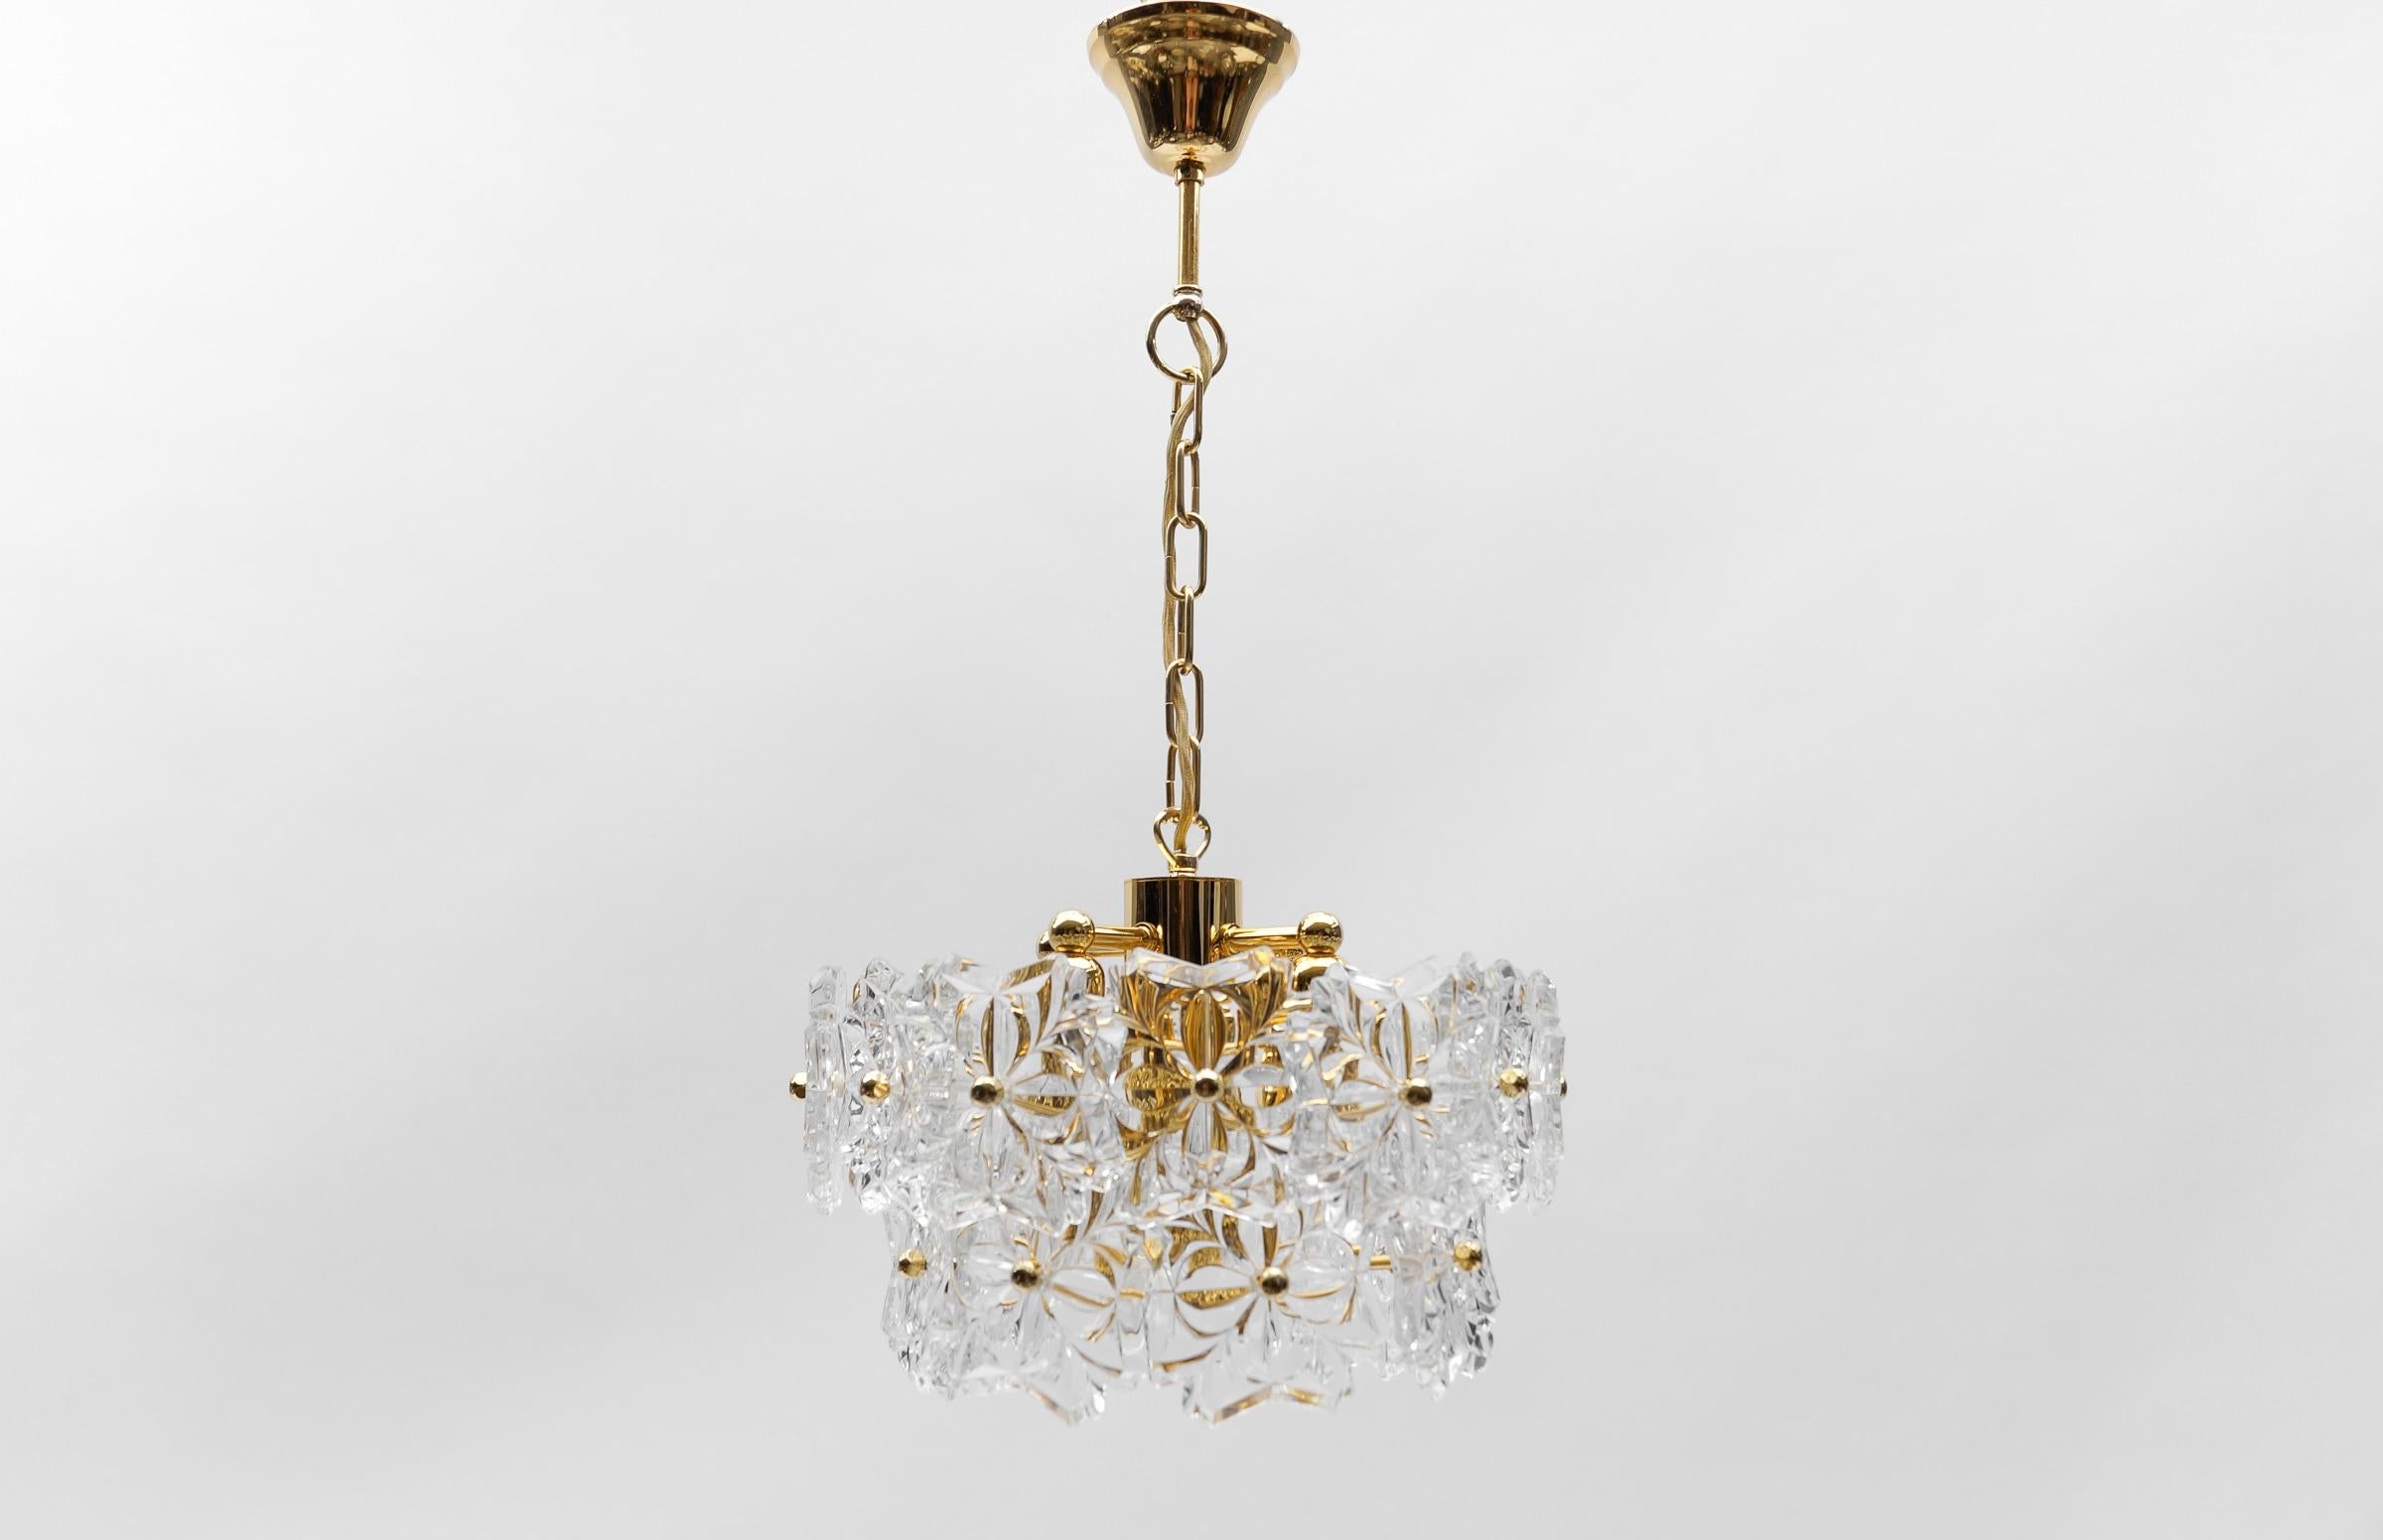 Lovely Floral Mid-Century Modern Crystal Glass Chandelier by Sölken  1960s Germany

Dimensions
Height: 21.65 in. (55 cm)
Diameter: 12.59 in. (32 cm)

The fixture needs 4 x E14 standard bulb with 60W max.

Light bulbs are not included.
It is possible